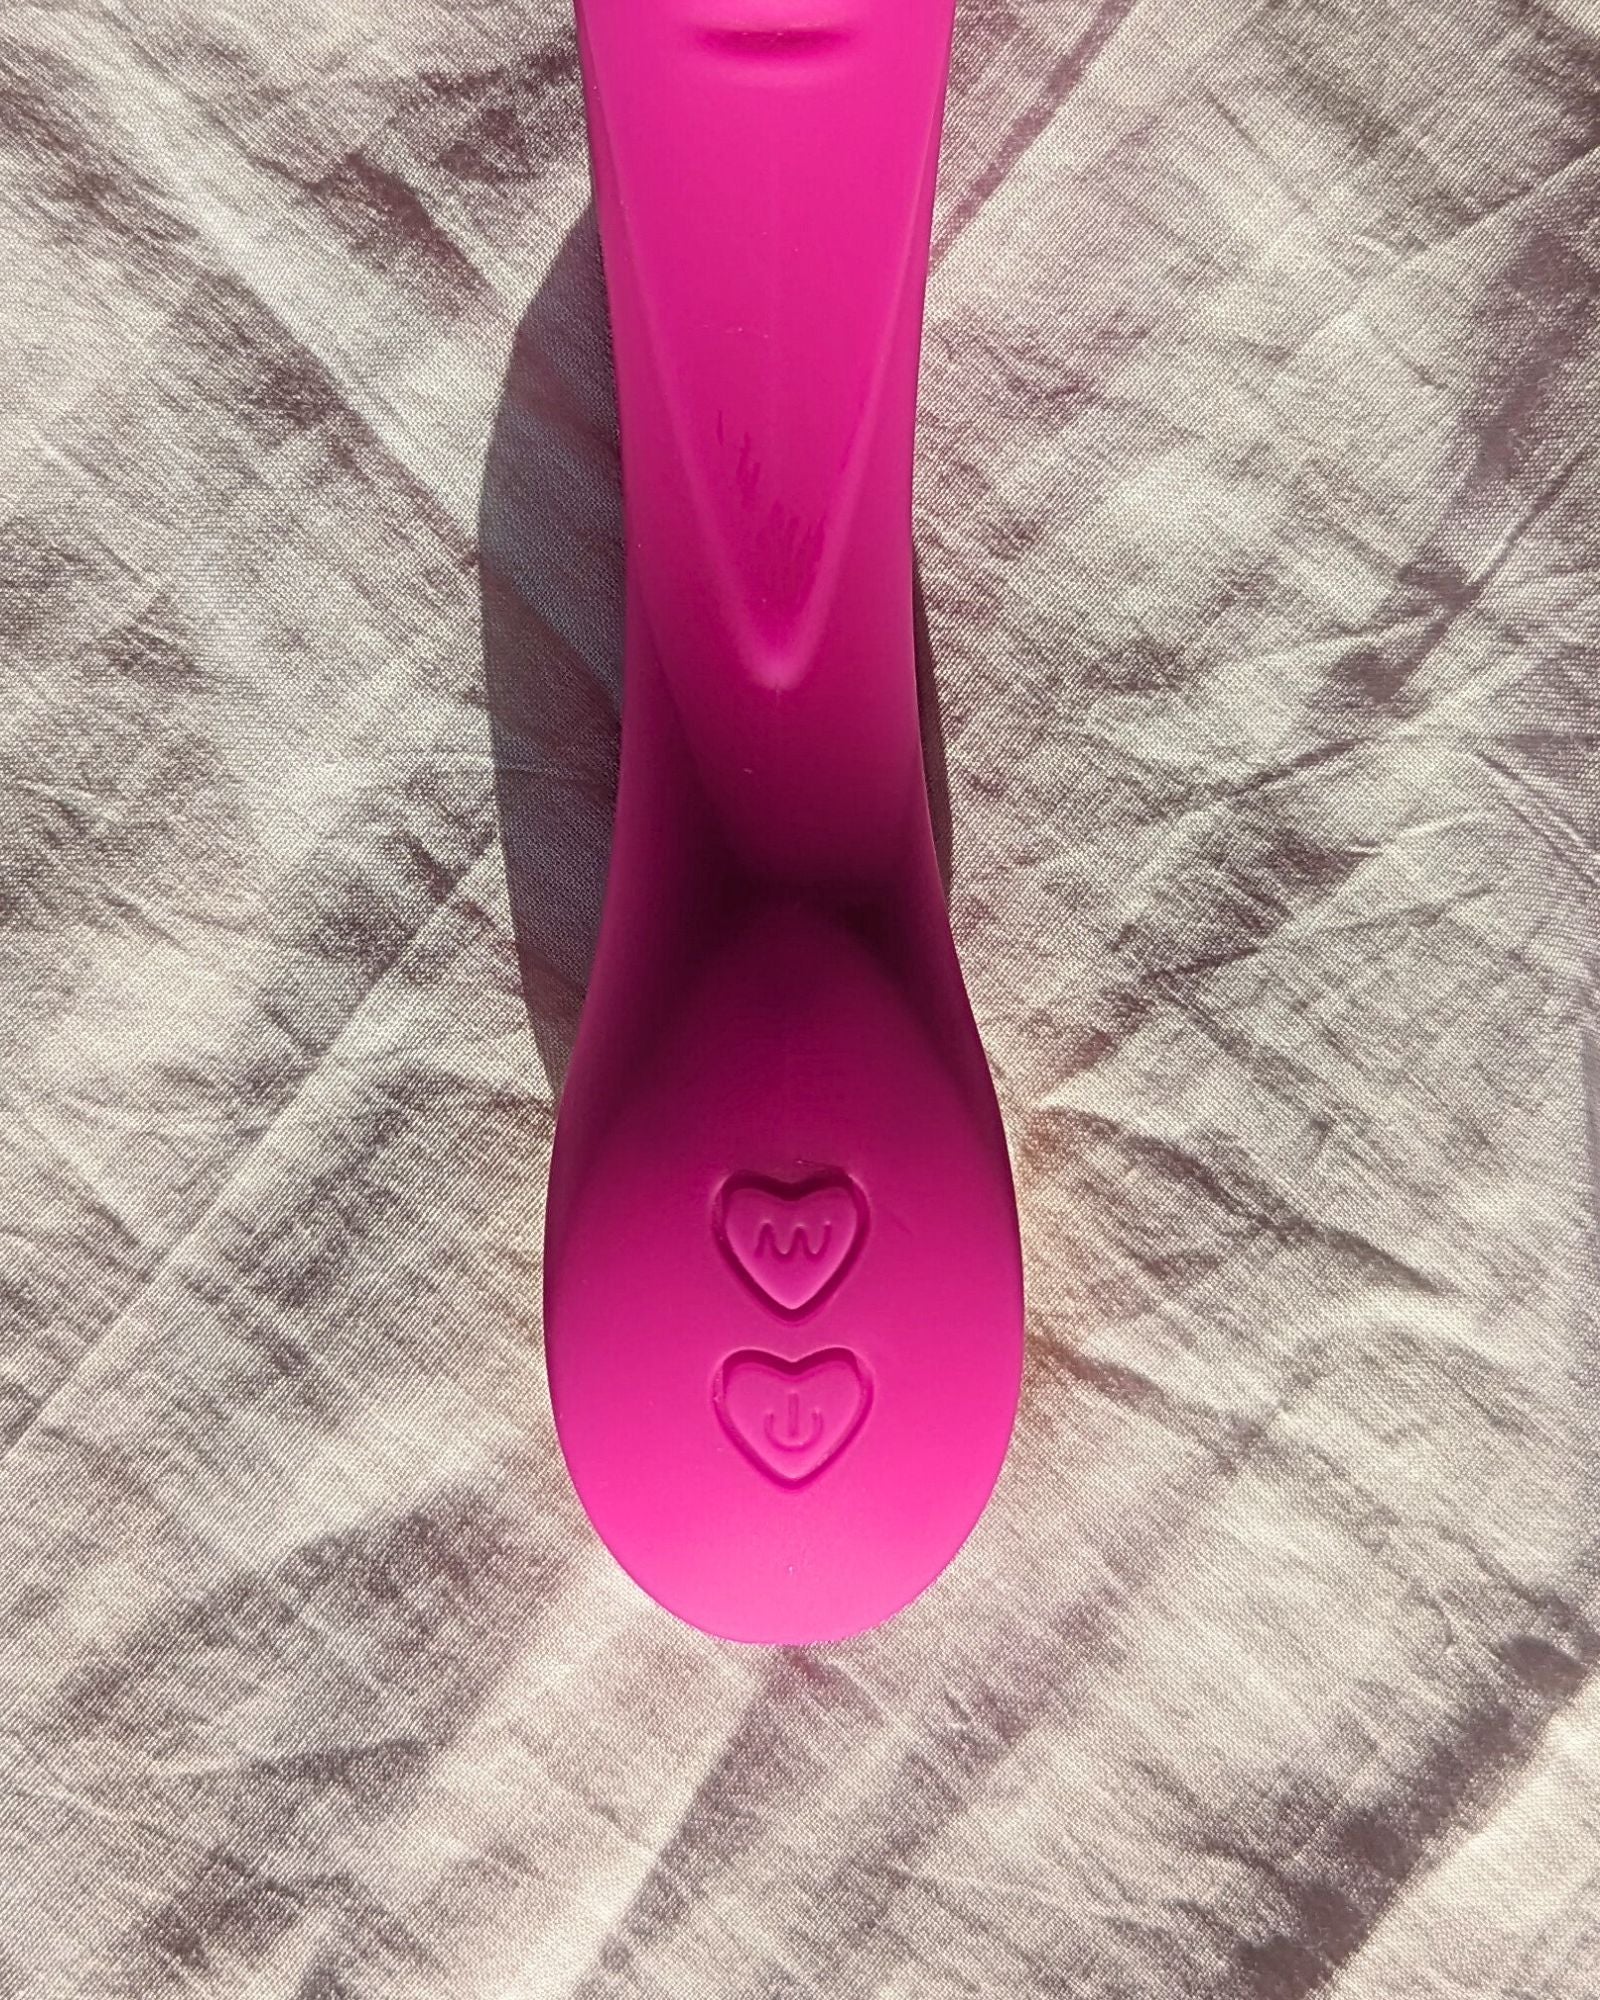 Sangya 55 Mini - Valentine's Day Special Limited Edition Mini Massager